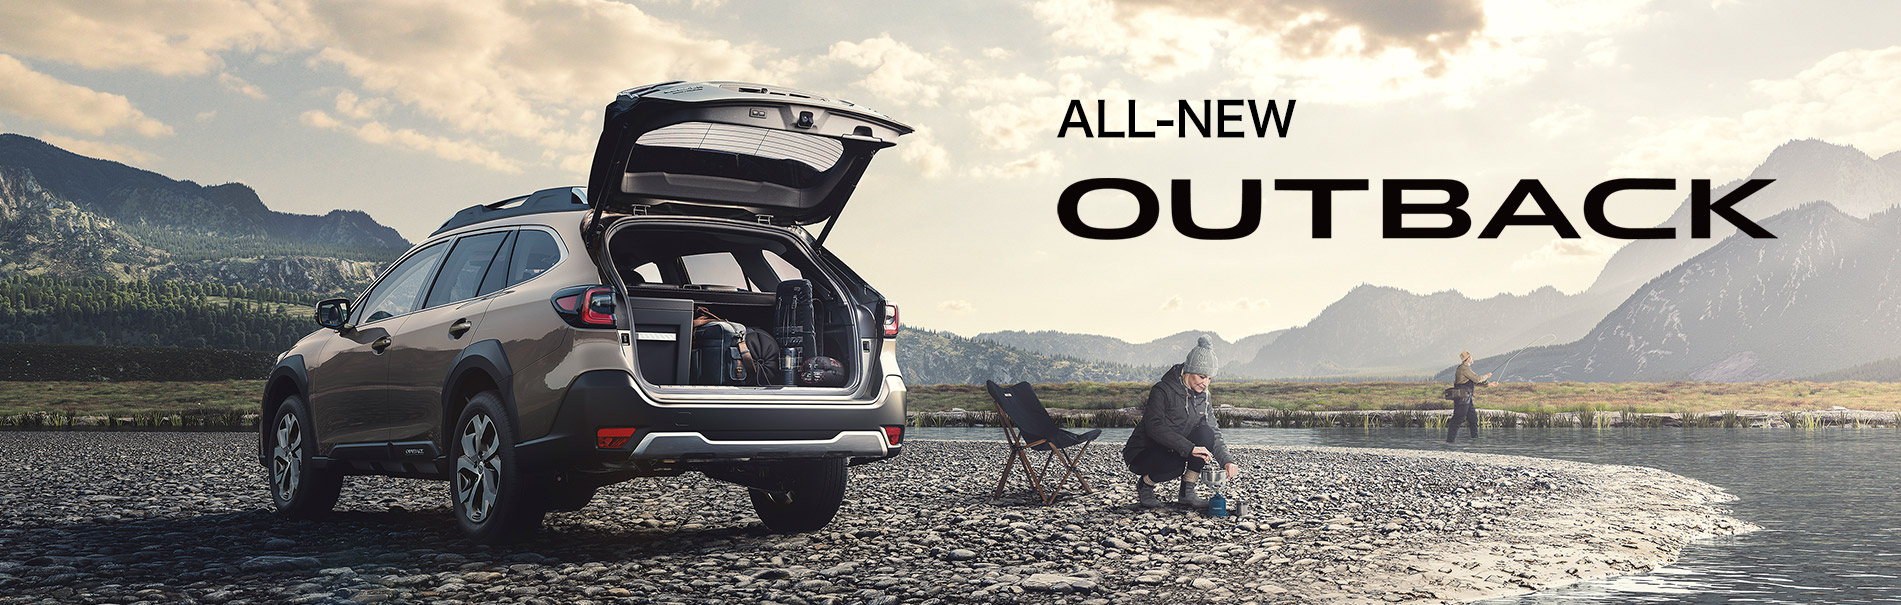 ALL-NEW OUTBACK